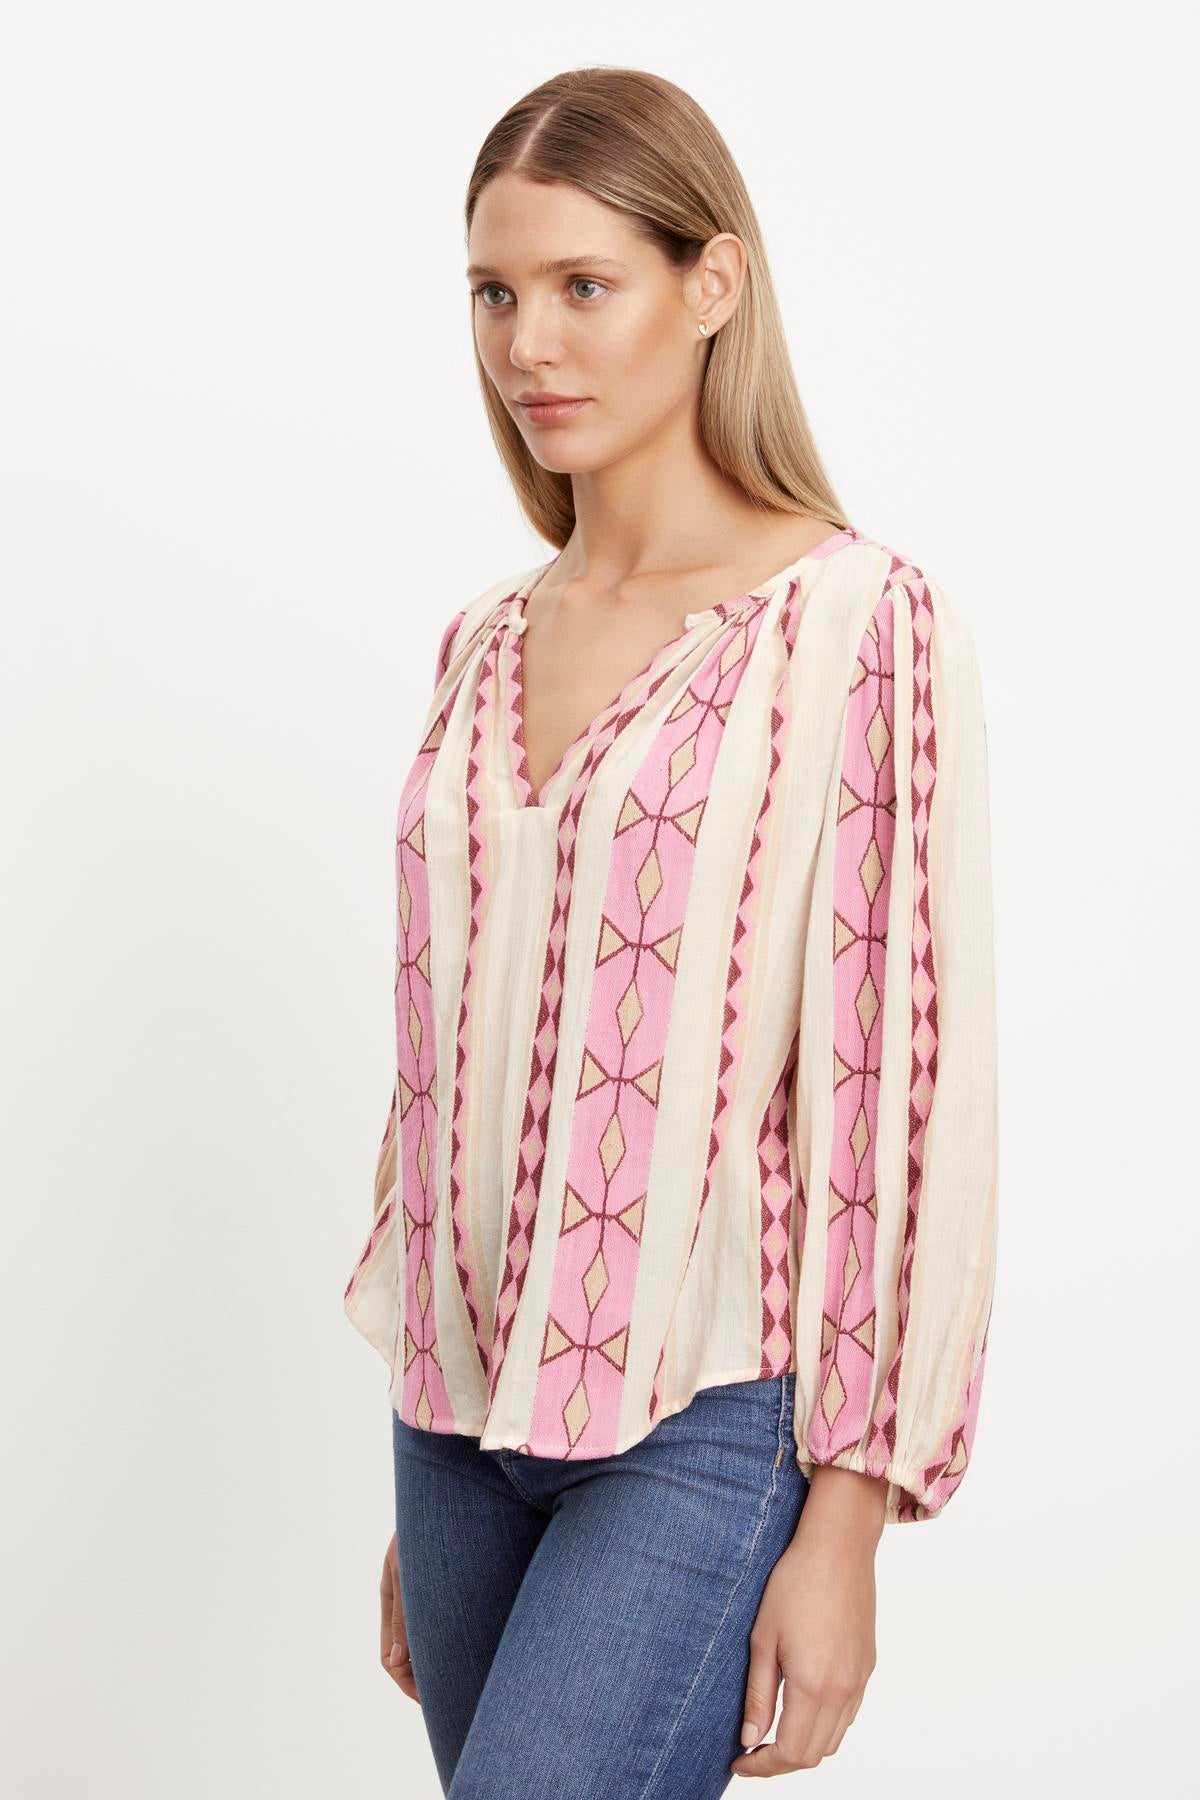 The model is wearing a pink and white embroidered NANNI JACQUARD V-NECK BLOUSE with elastic cuffs and a v-neckline by Velvet by Graham & Spencer.-36220815769793